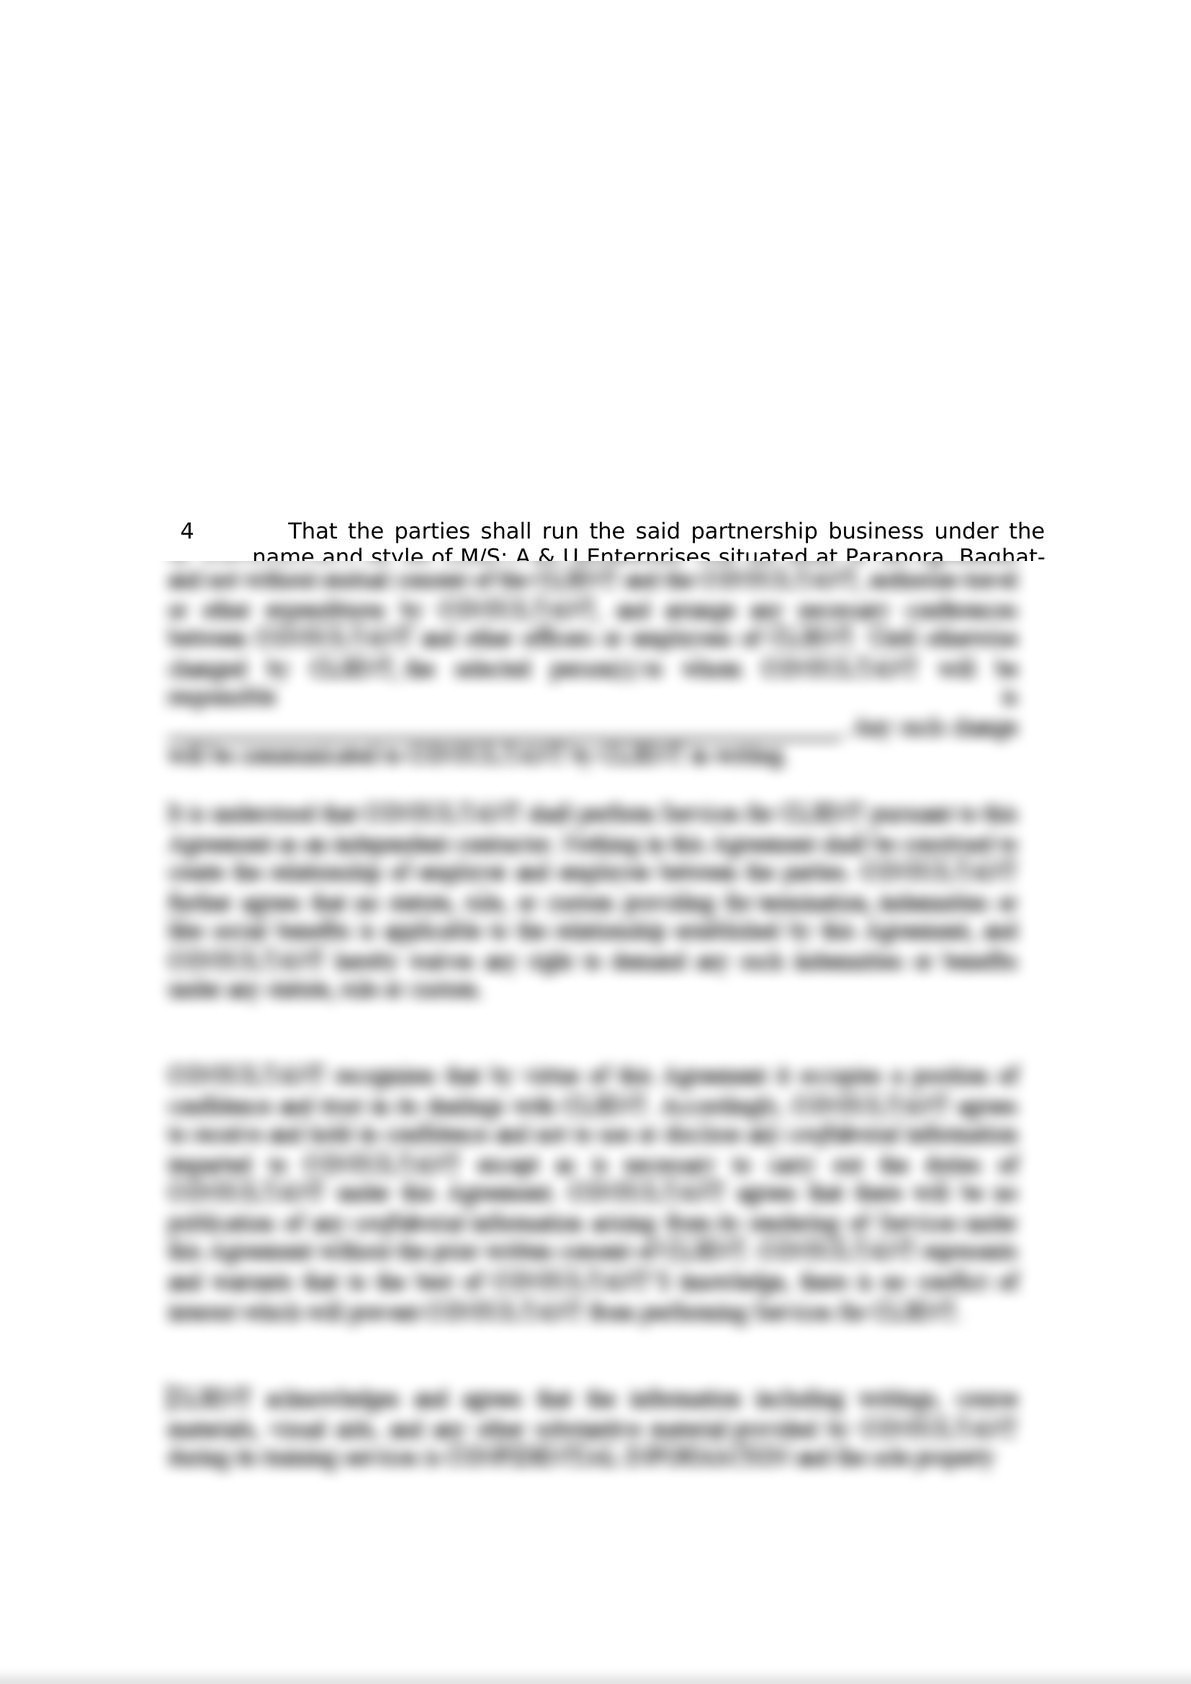 Partnership agreement sample.  For other related legal documents feel free to ask-1